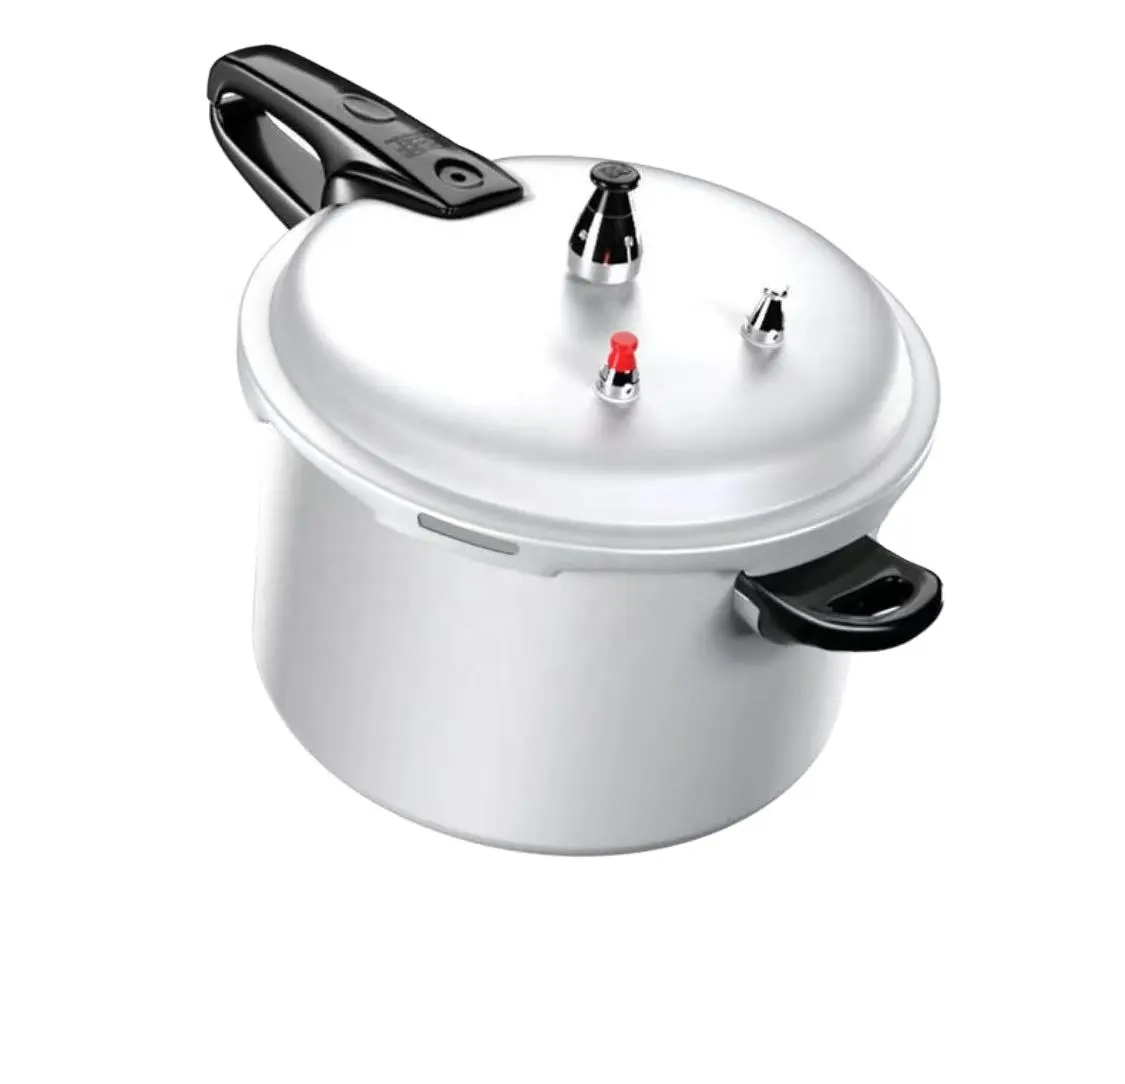 Aluminum Alloy Pressure Cooker Gas Induction Cooker General Pressure Cooker